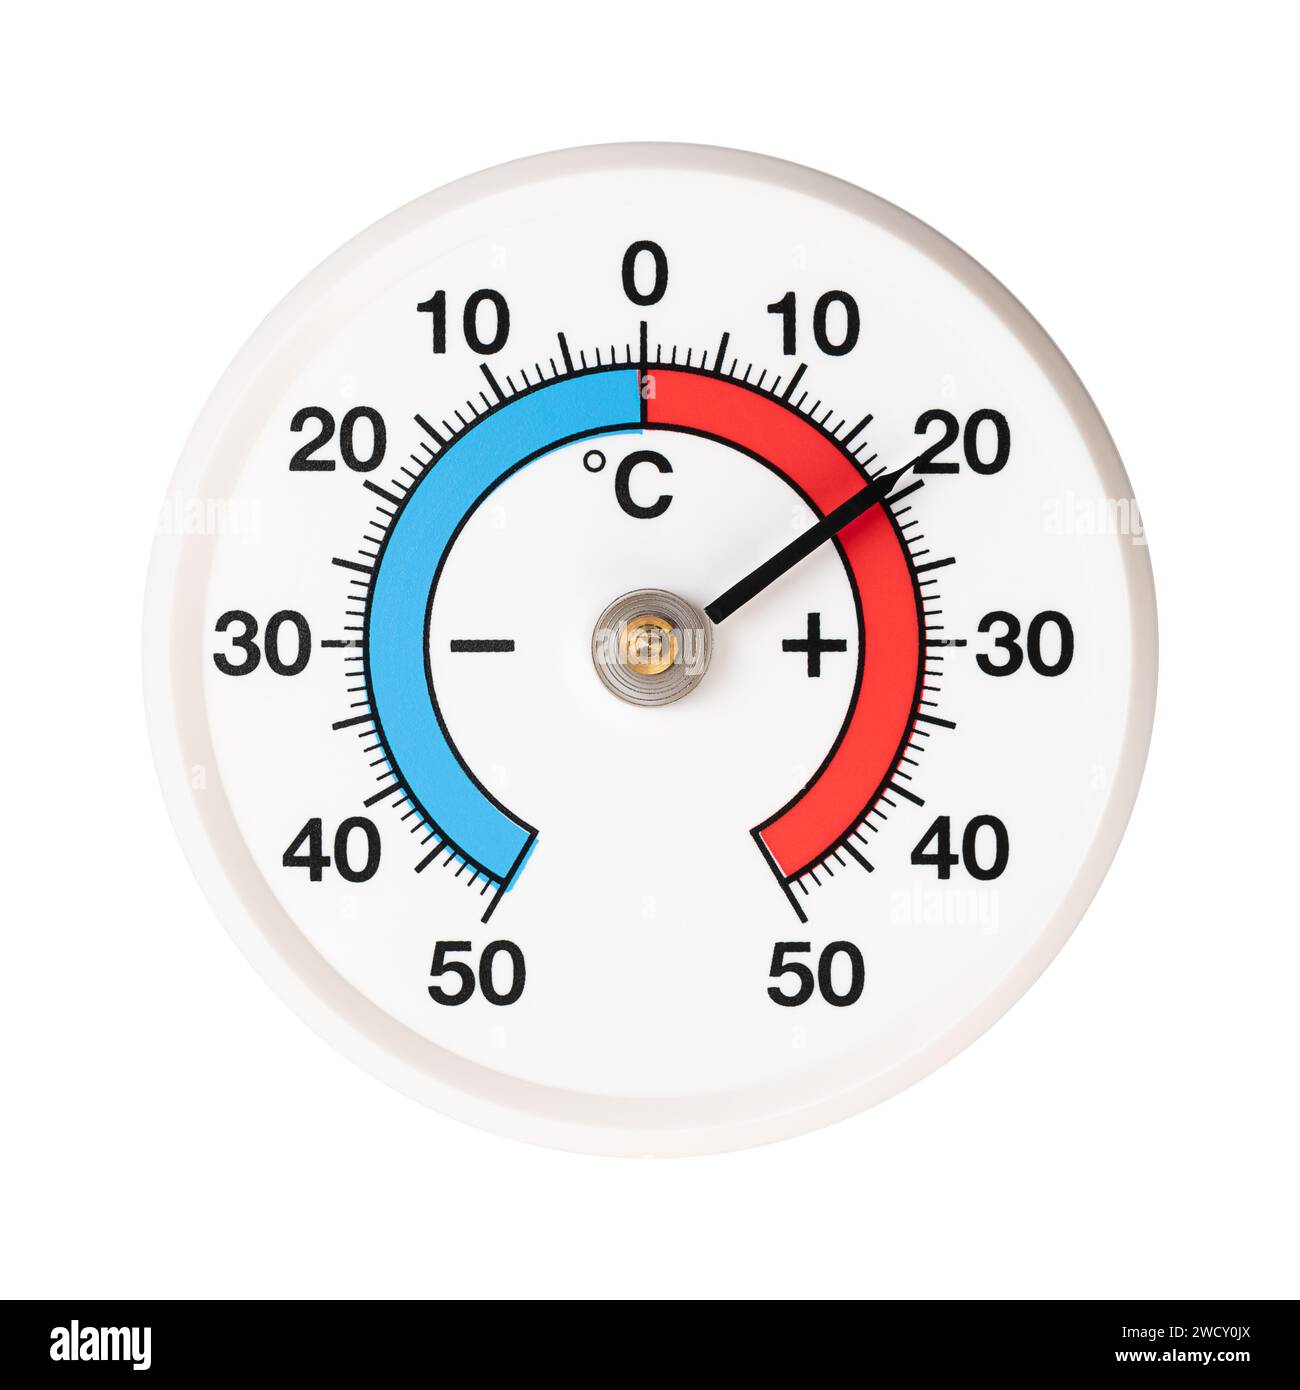 Spiral strip bimetallic thermometer, with degree graduation in Celsius. Temperature changes expand or decrease the two metal strips differently. Stock Photo